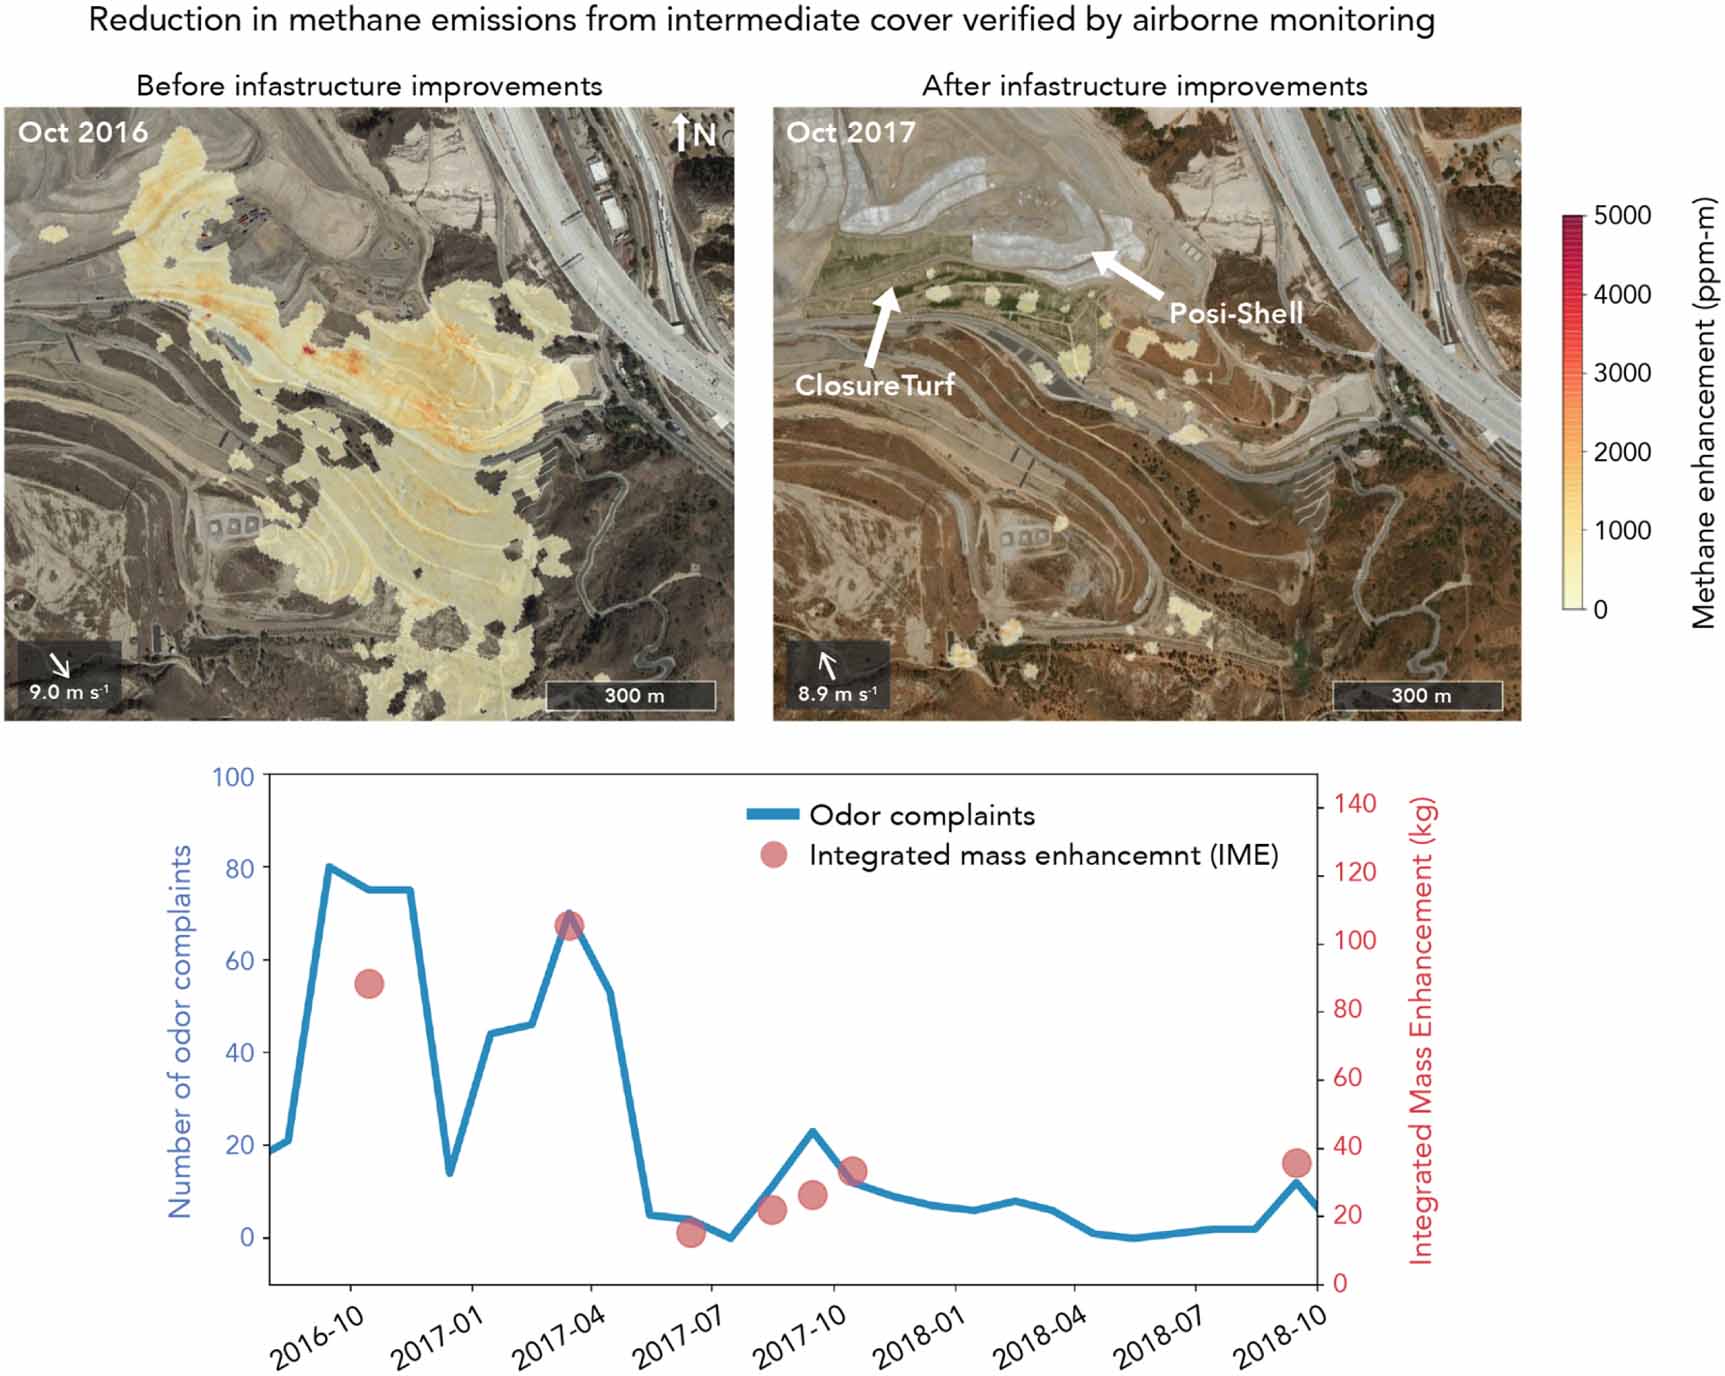 The left image shows the methane retrieved by AVIRIS-NG during its October 2016 overpass of Sunshine Canyon Landfill. The right image shows the reduction in methane concentration by the time of the October 2017 AVIRIS-NG overpass, after landfill improvements were implemented. Methane emissions shown in a yellow to red gradient, with red representing higher concentrations of methane.